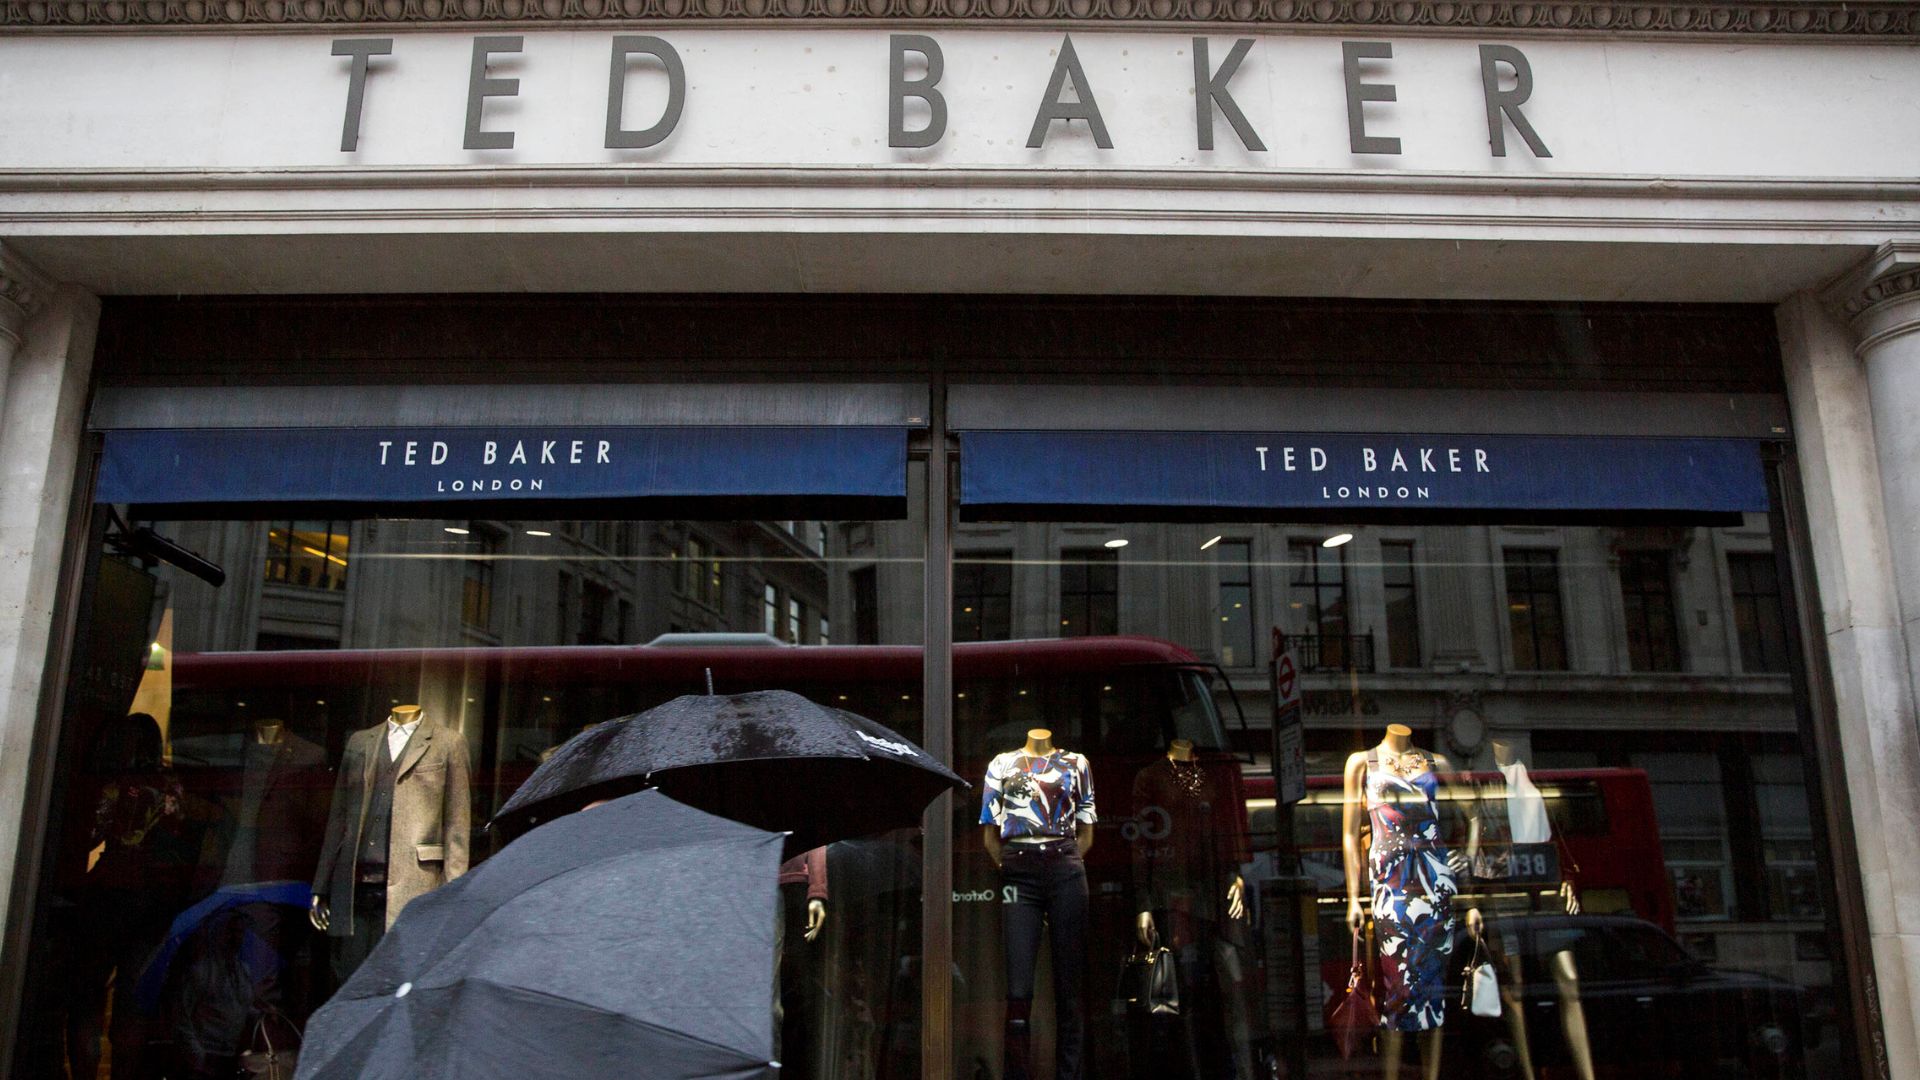 Luxury brand Ted Baker is one of a growing list of UK retailers struggling to survive on the high street. /Neil Hall/Reuters